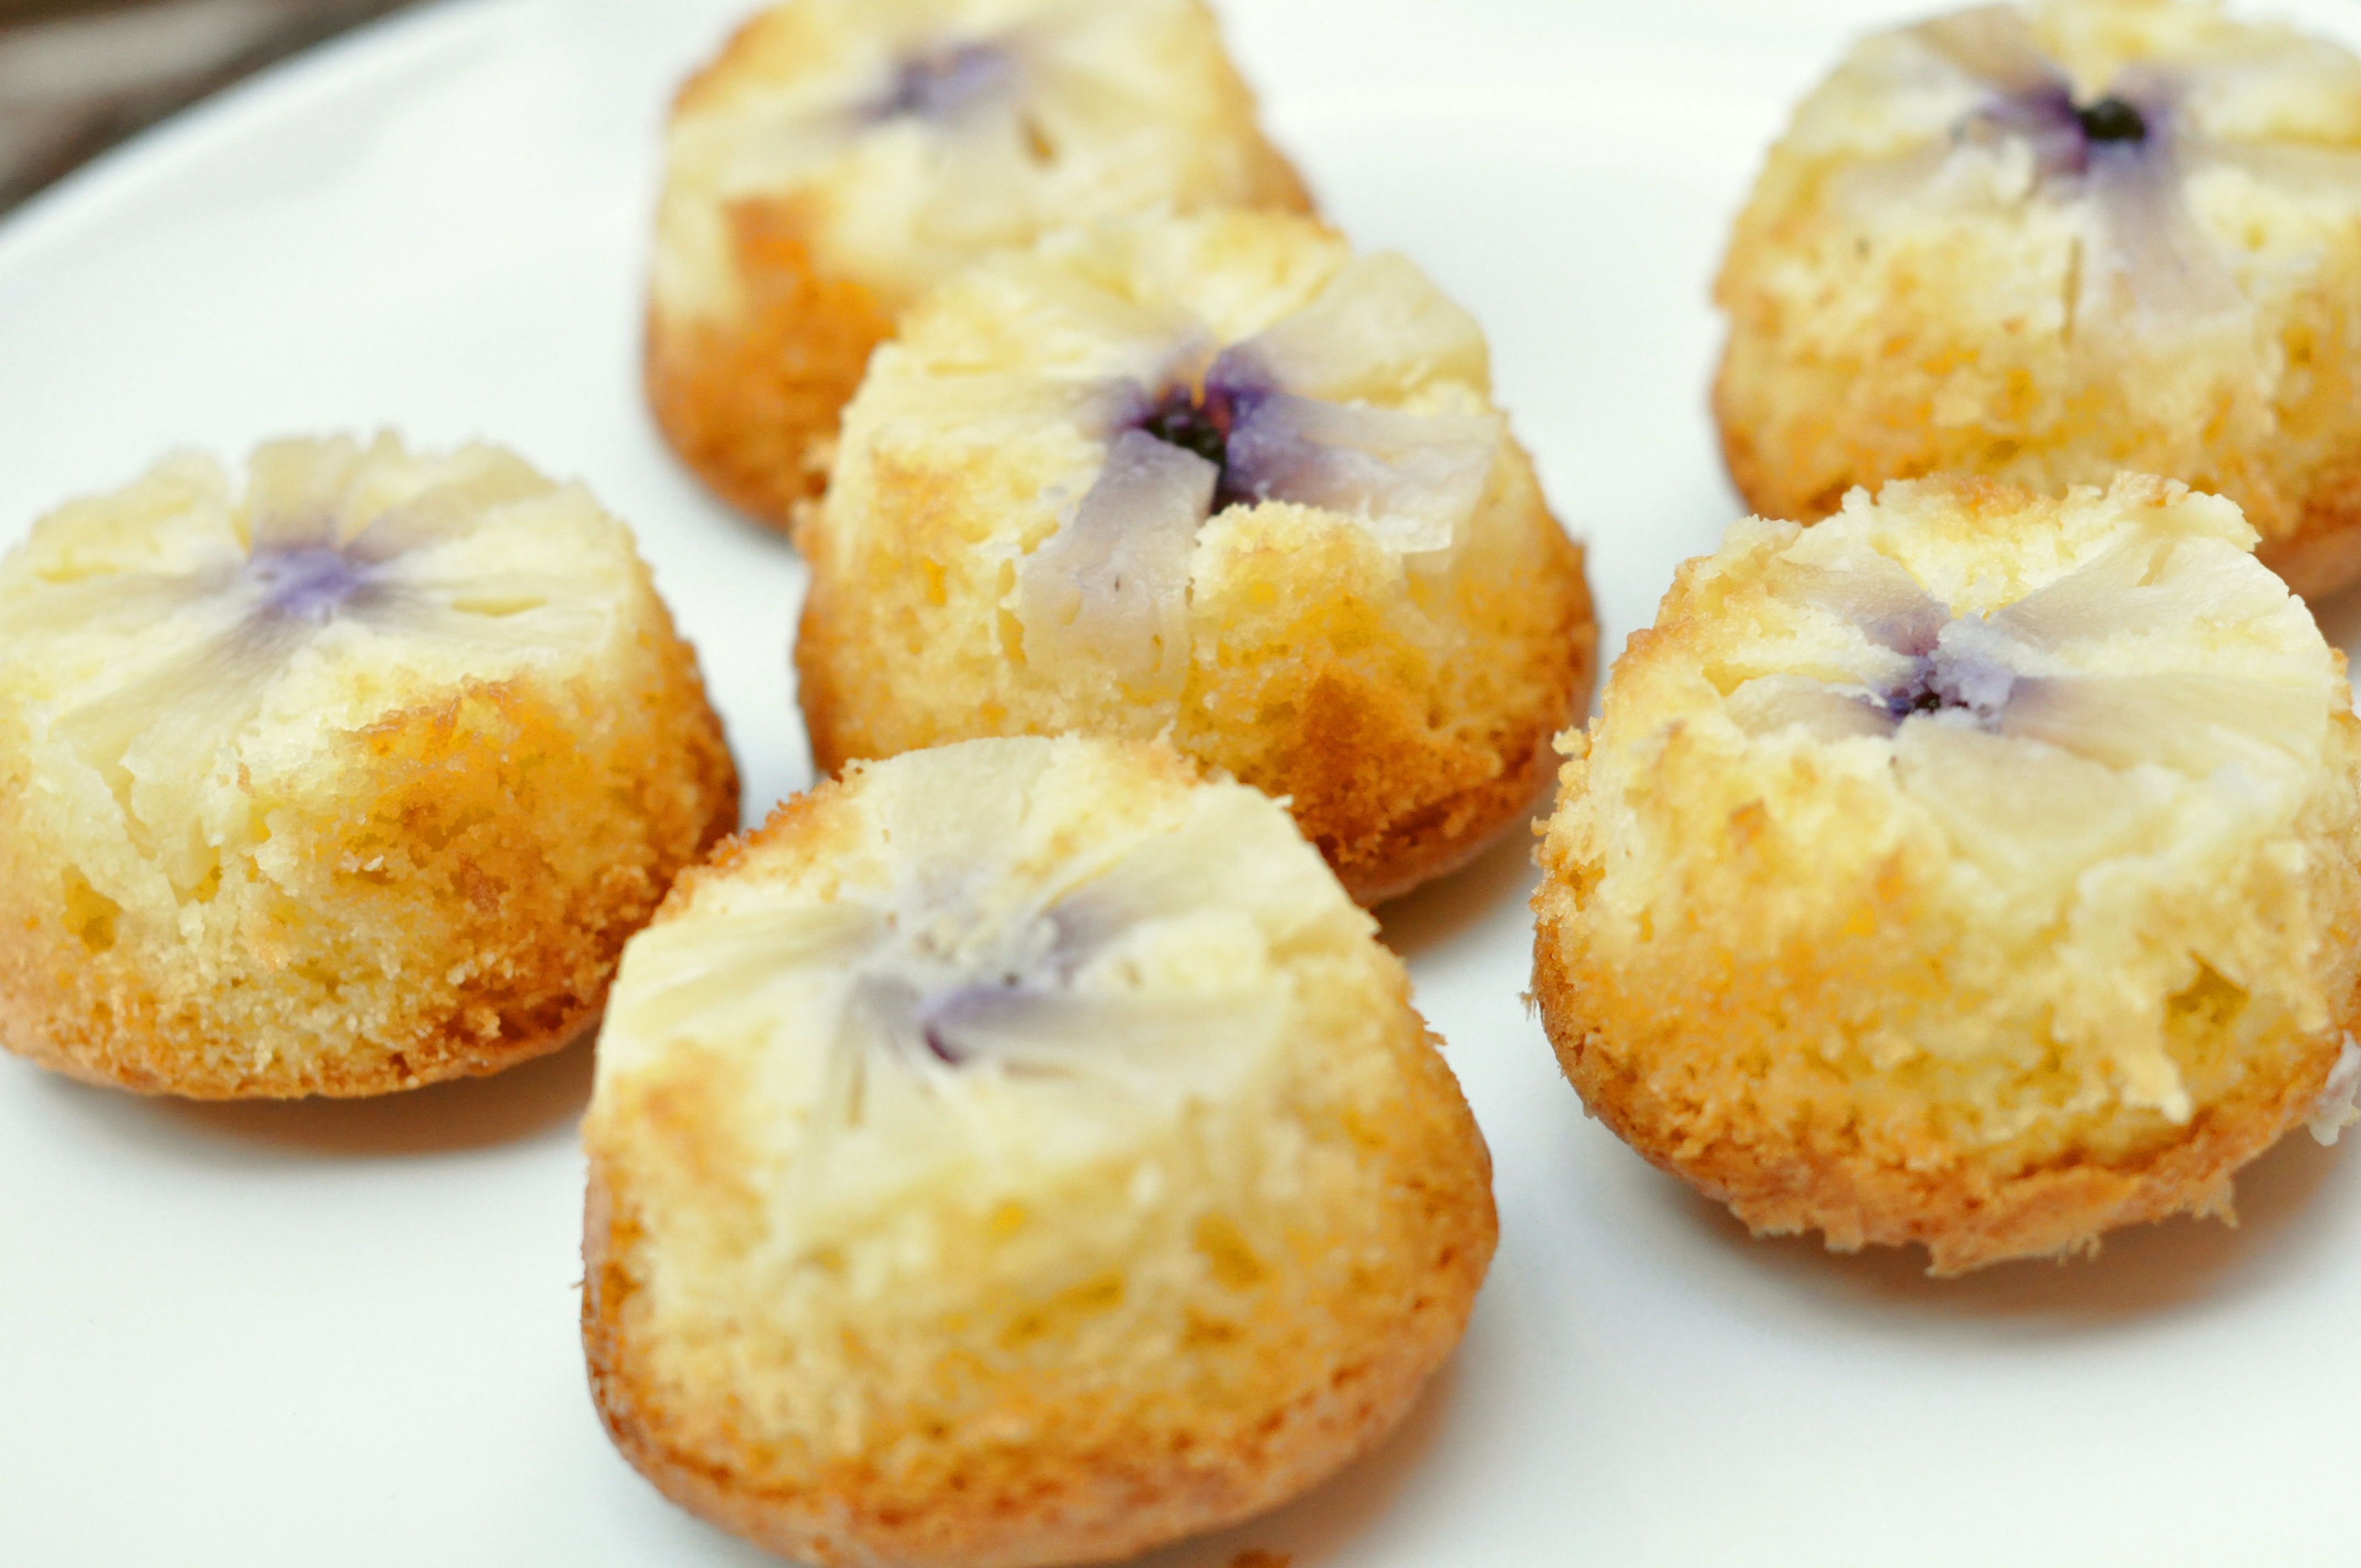 Upside down pineapple muffins